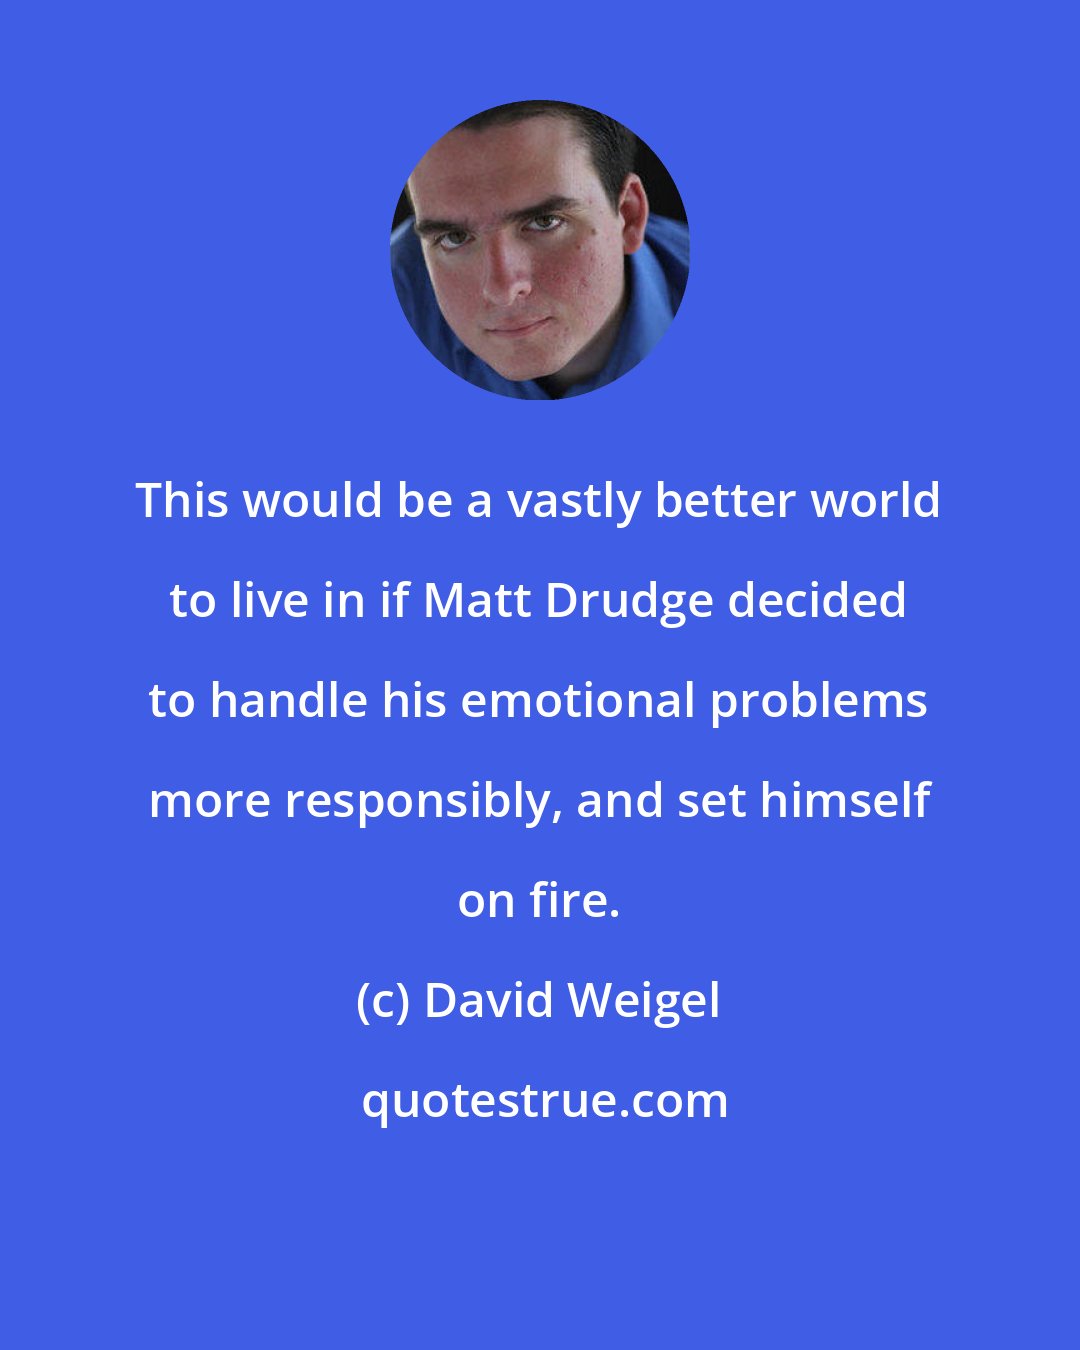 David Weigel: This would be a vastly better world to live in if Matt Drudge decided to handle his emotional problems more responsibly, and set himself on fire.